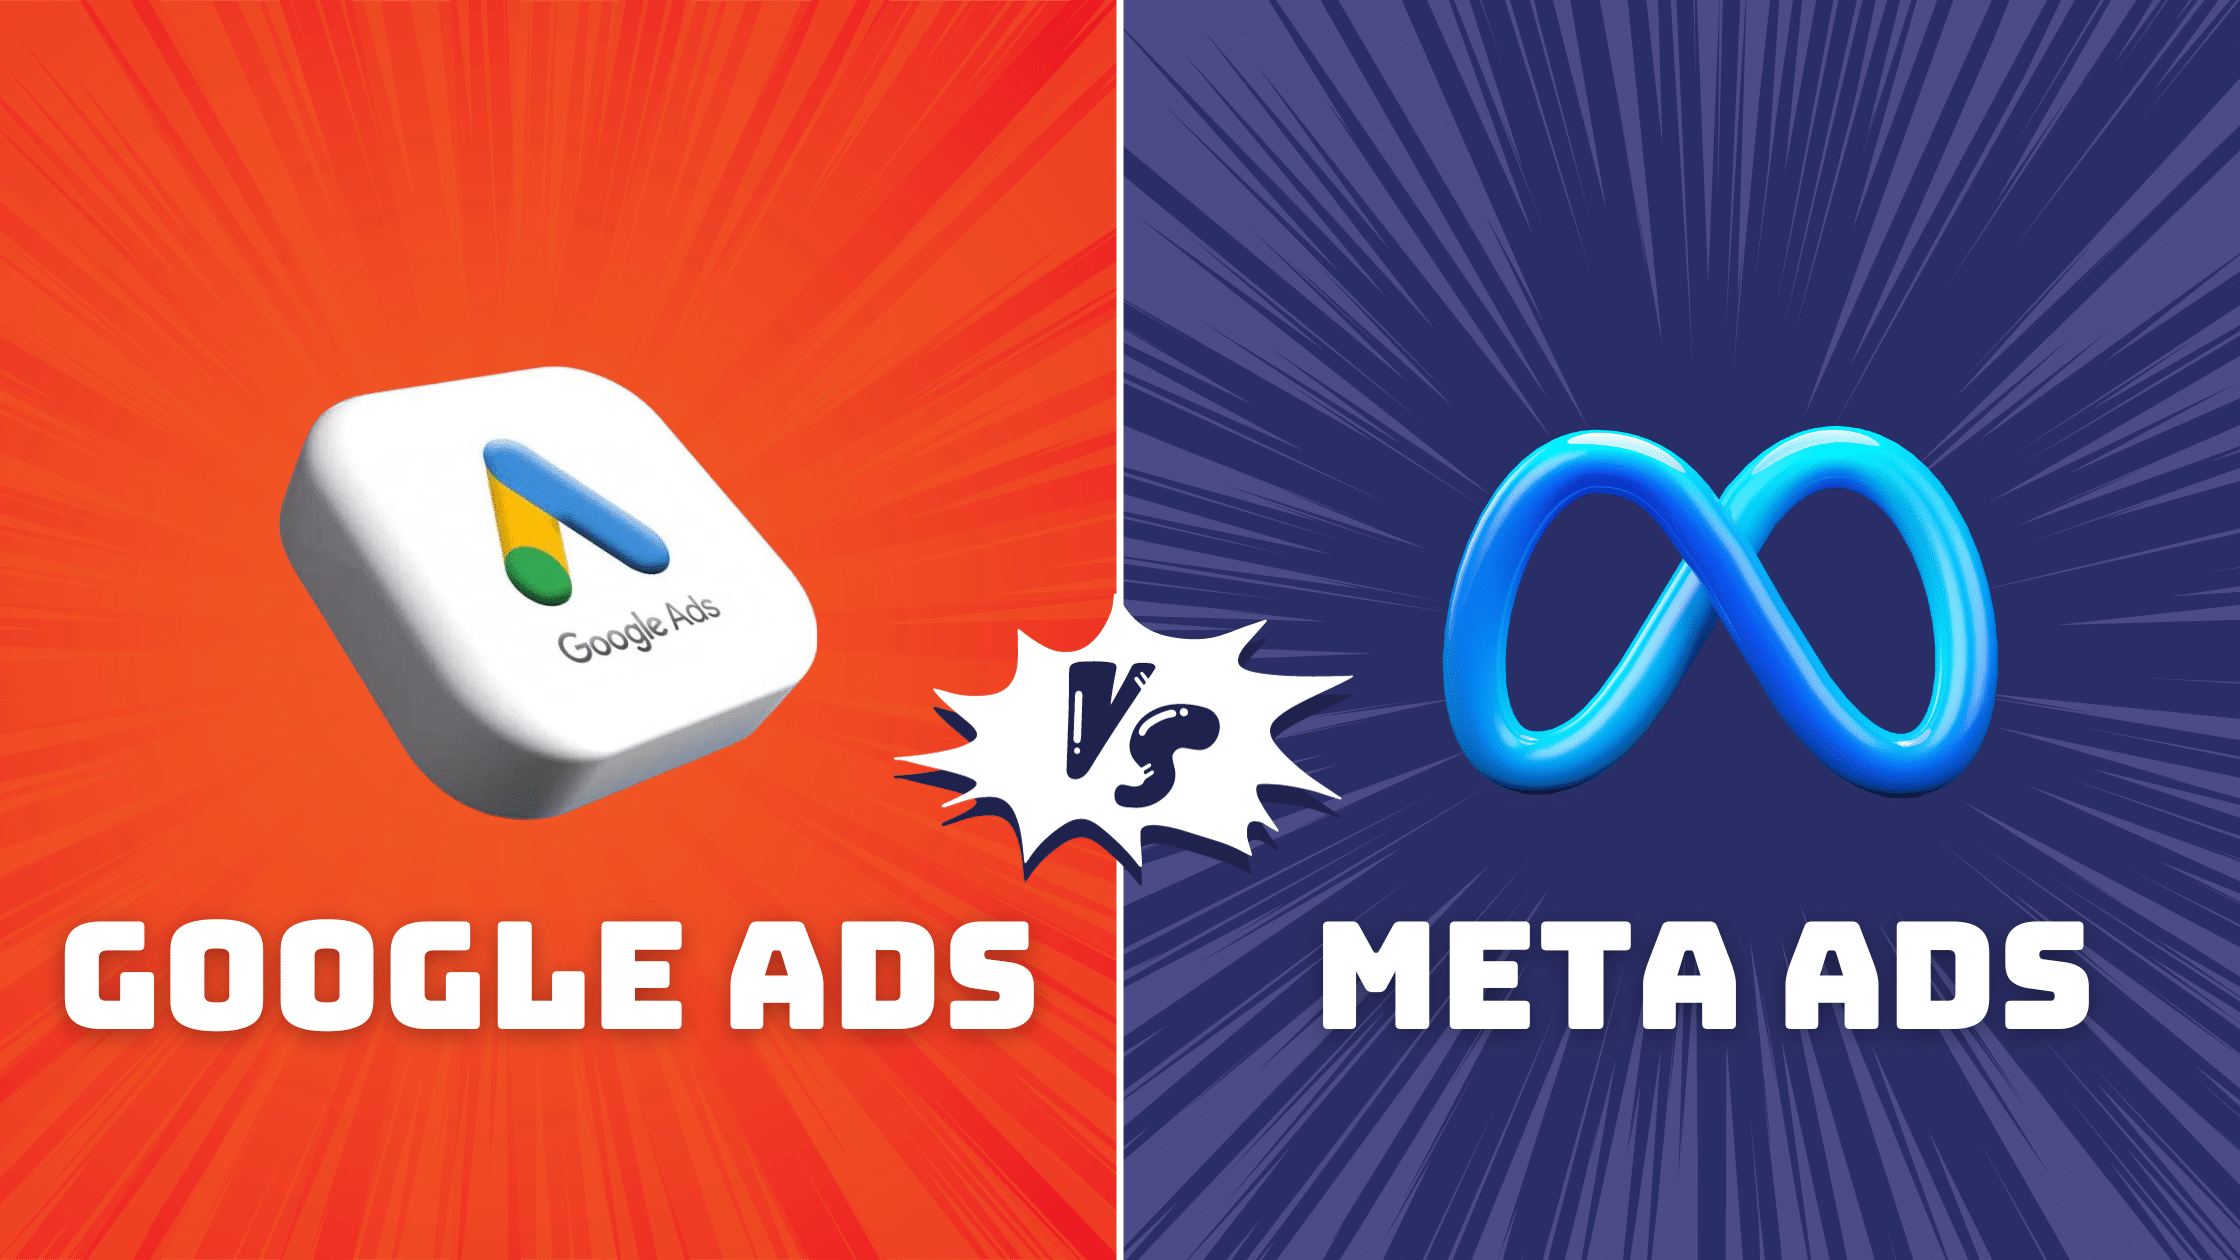 Meta Ads Vs Google Ads. Google Ads with logo on Left and Meta logo on the right side.